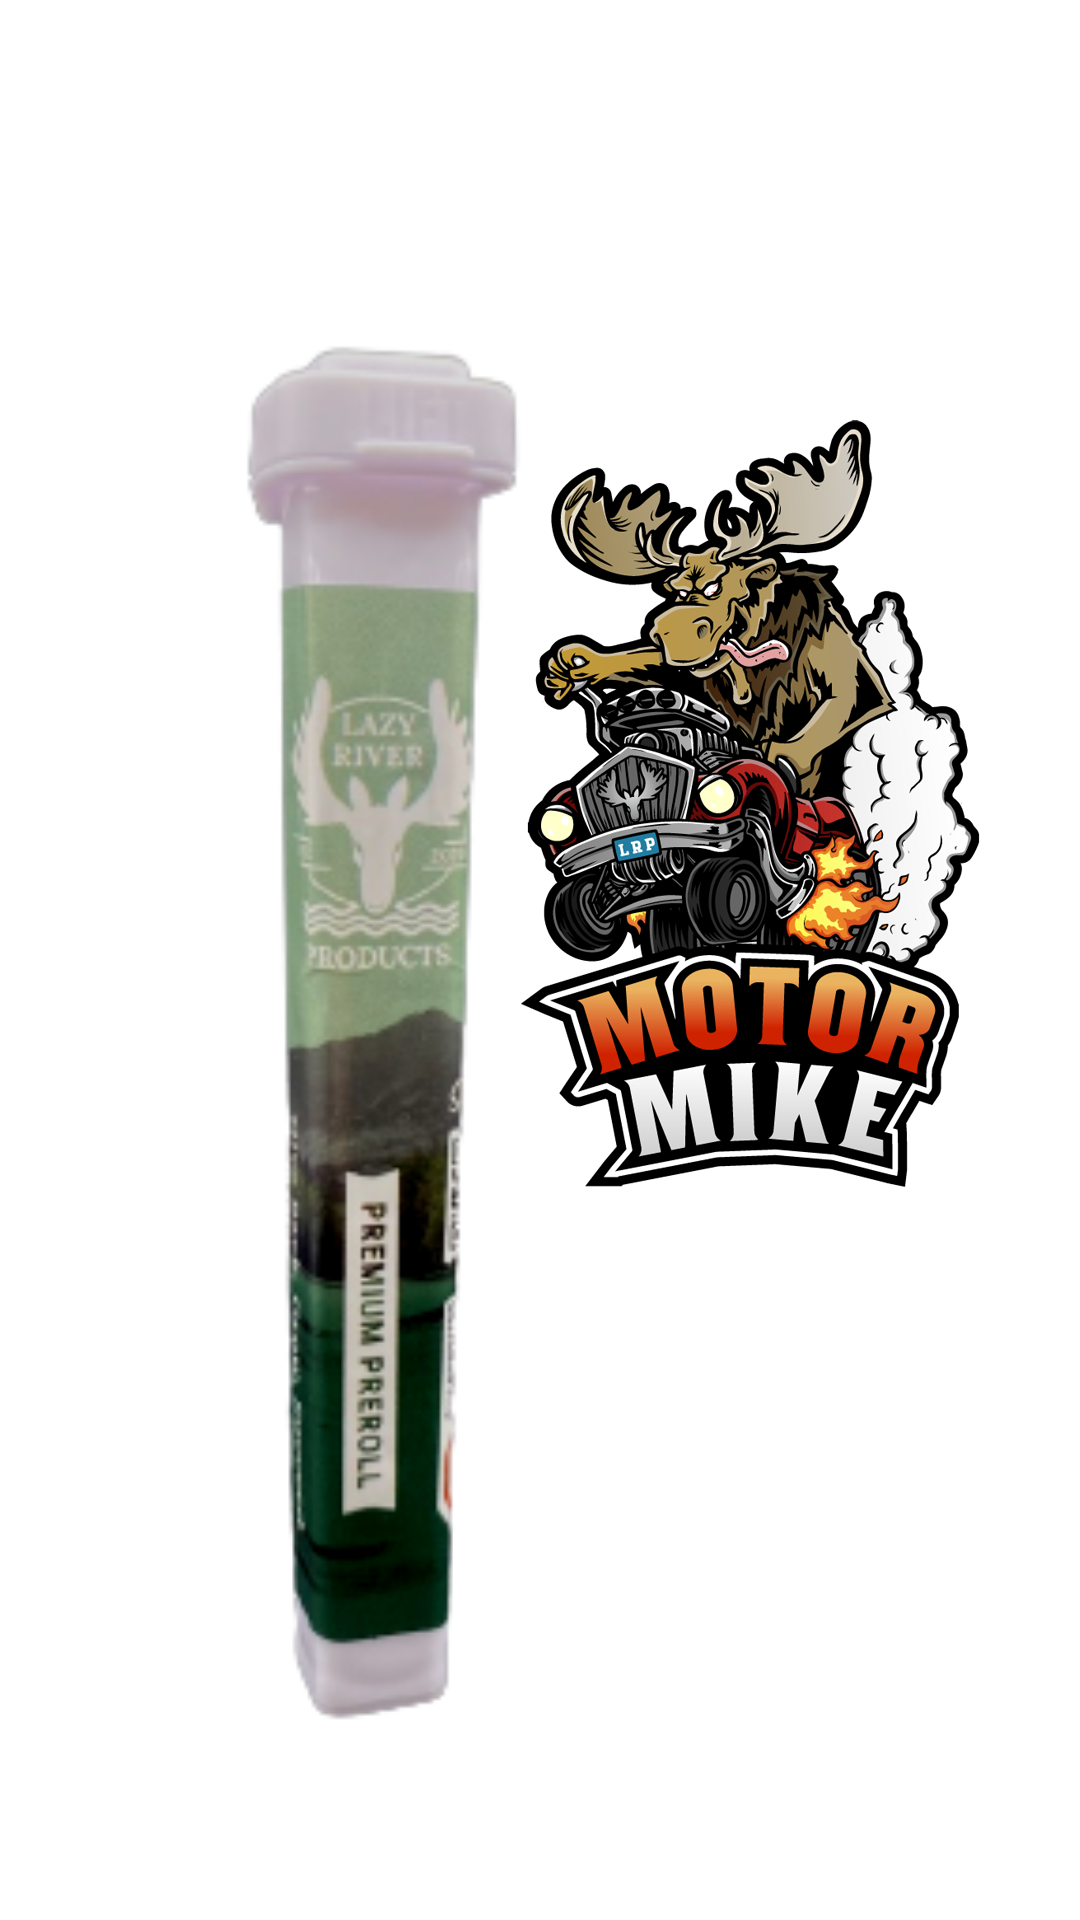 motor mike preroll logo and packaging